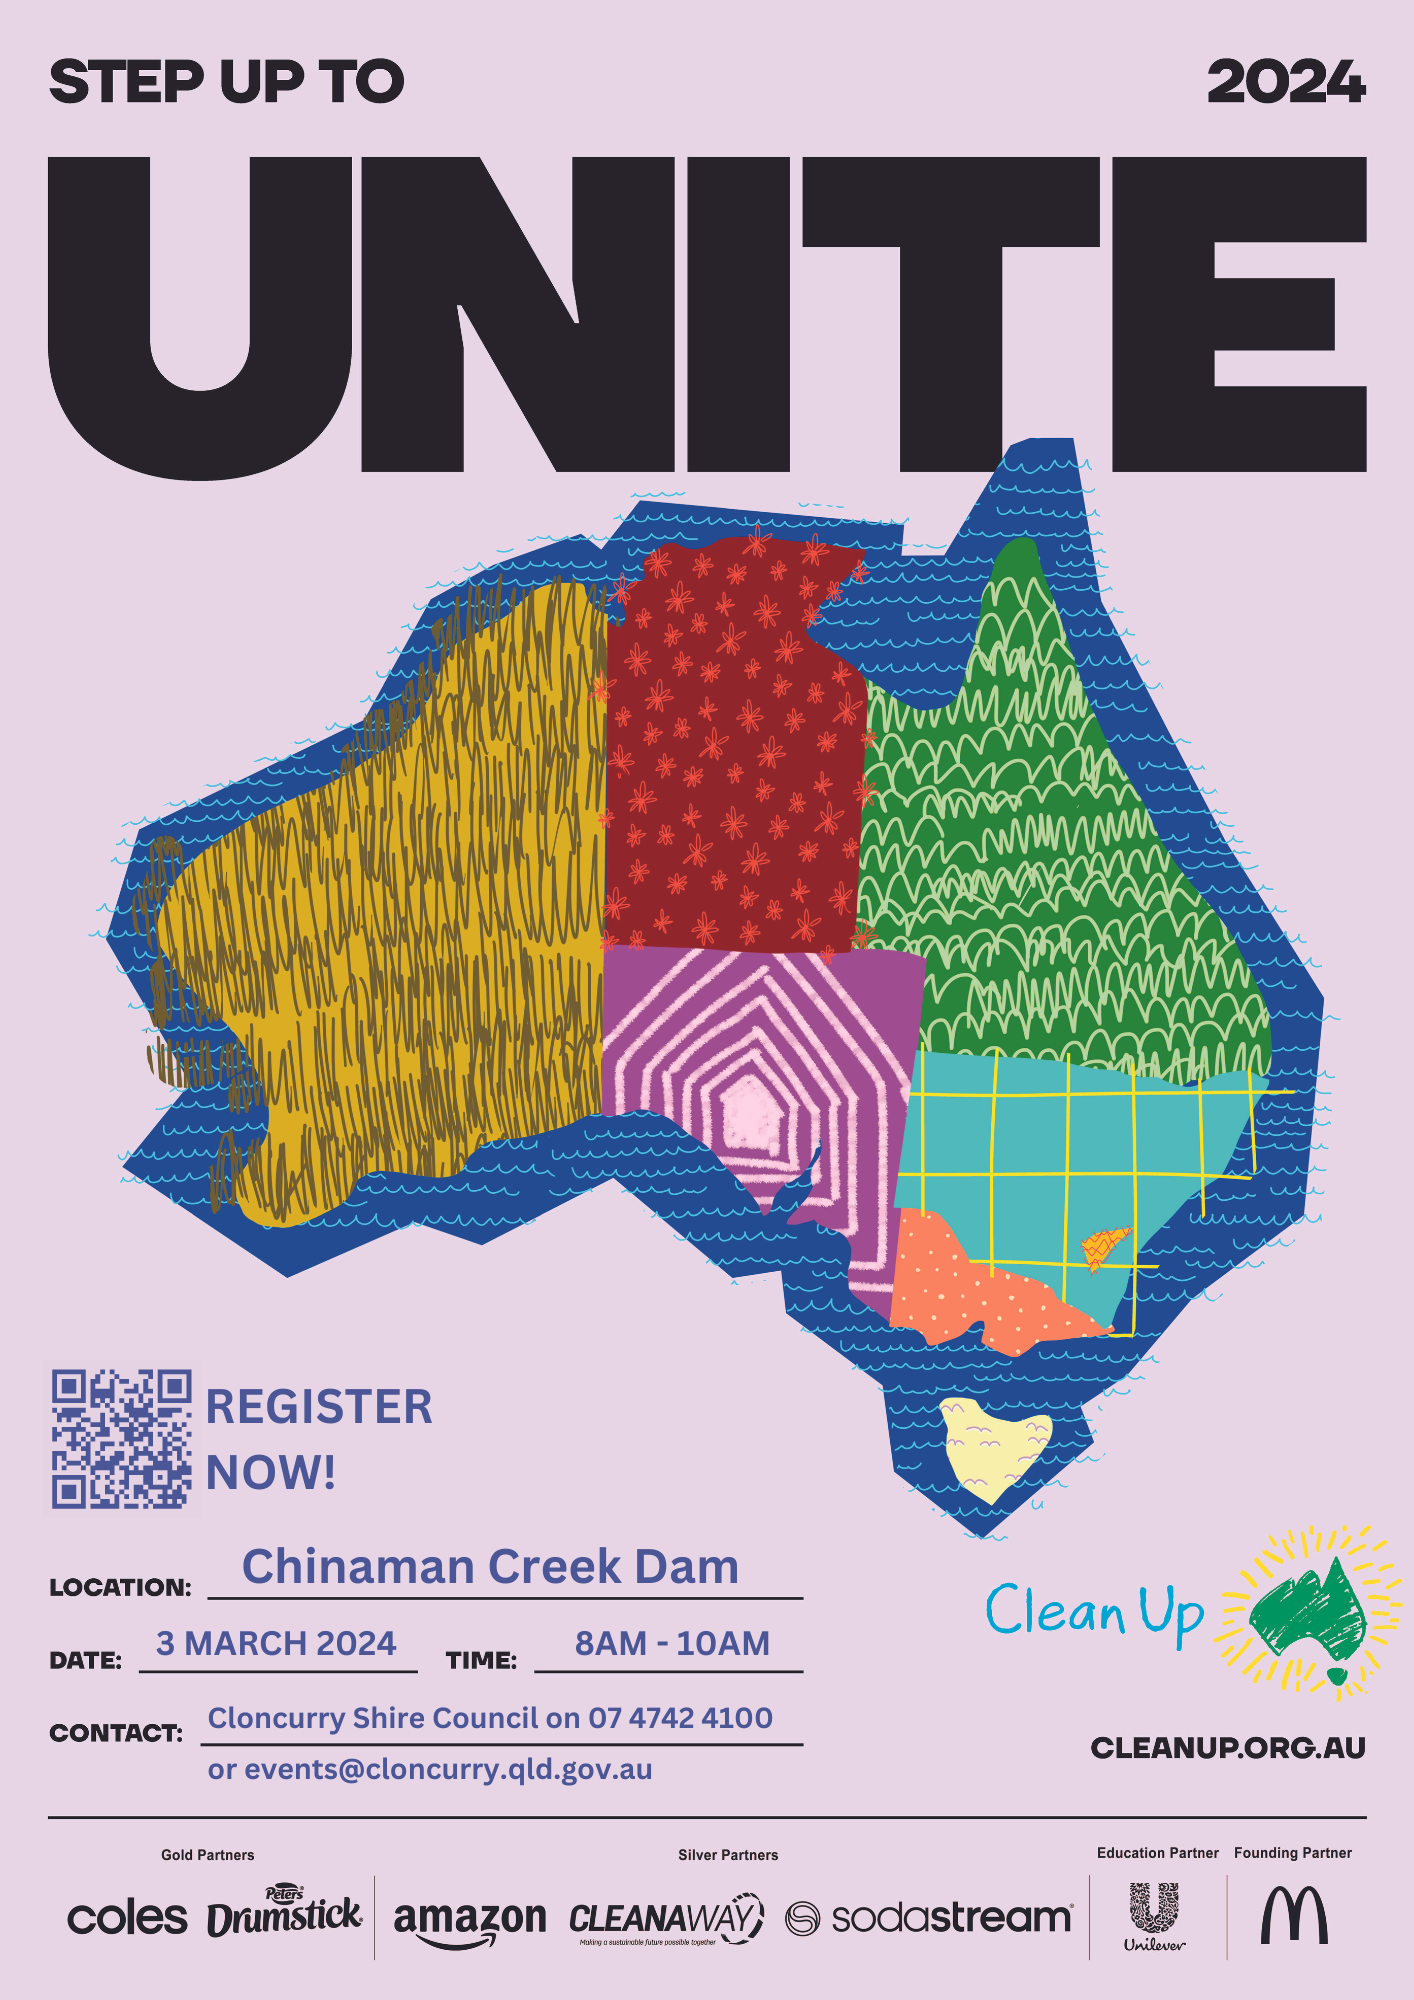 Clean Up Australia Day - Event Poster 2024